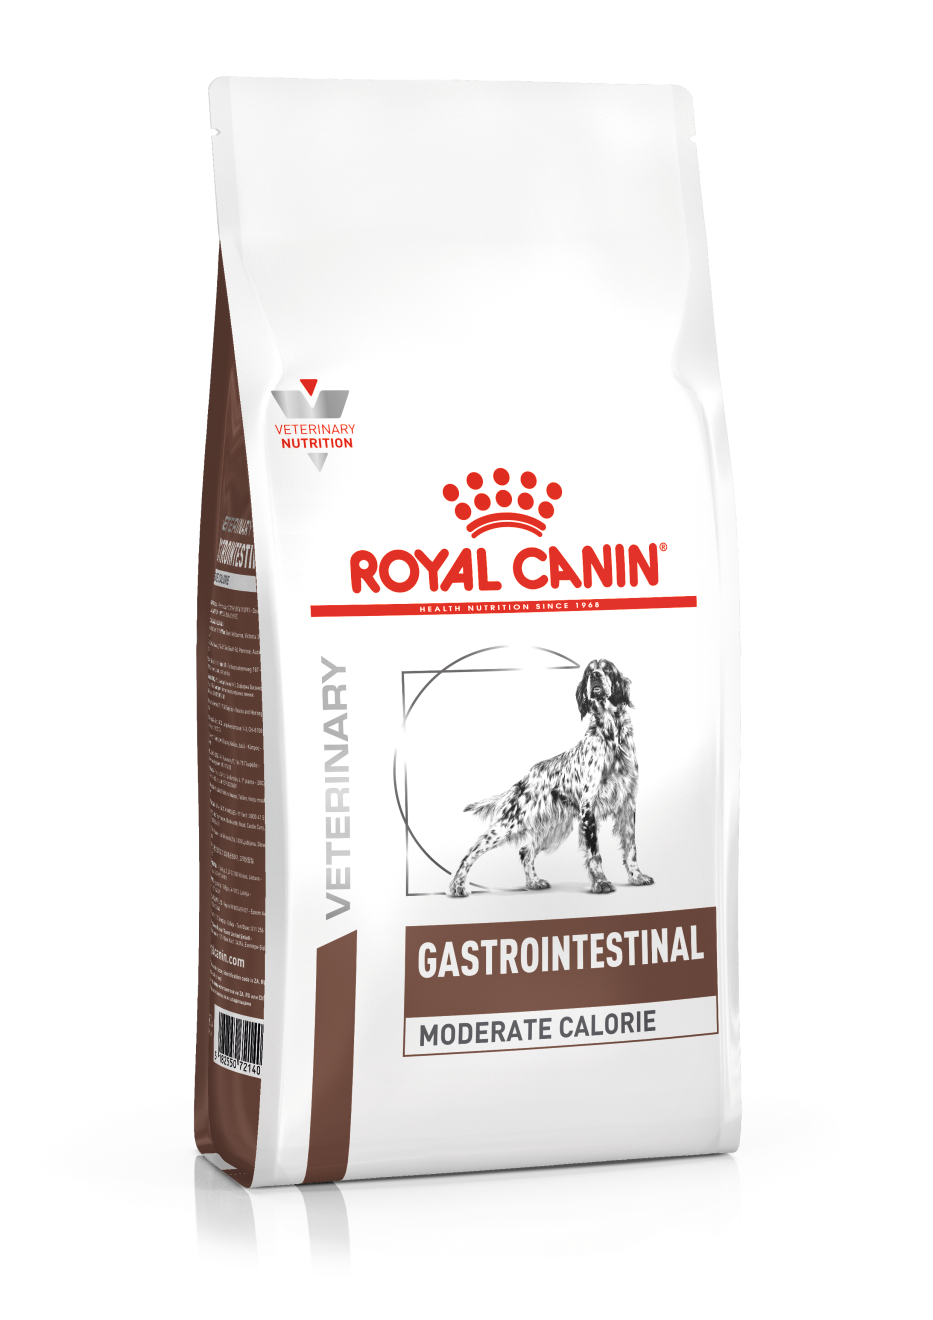 Royal Canin Gastro Intestinal Moderate Calorie hond  2x2 kg